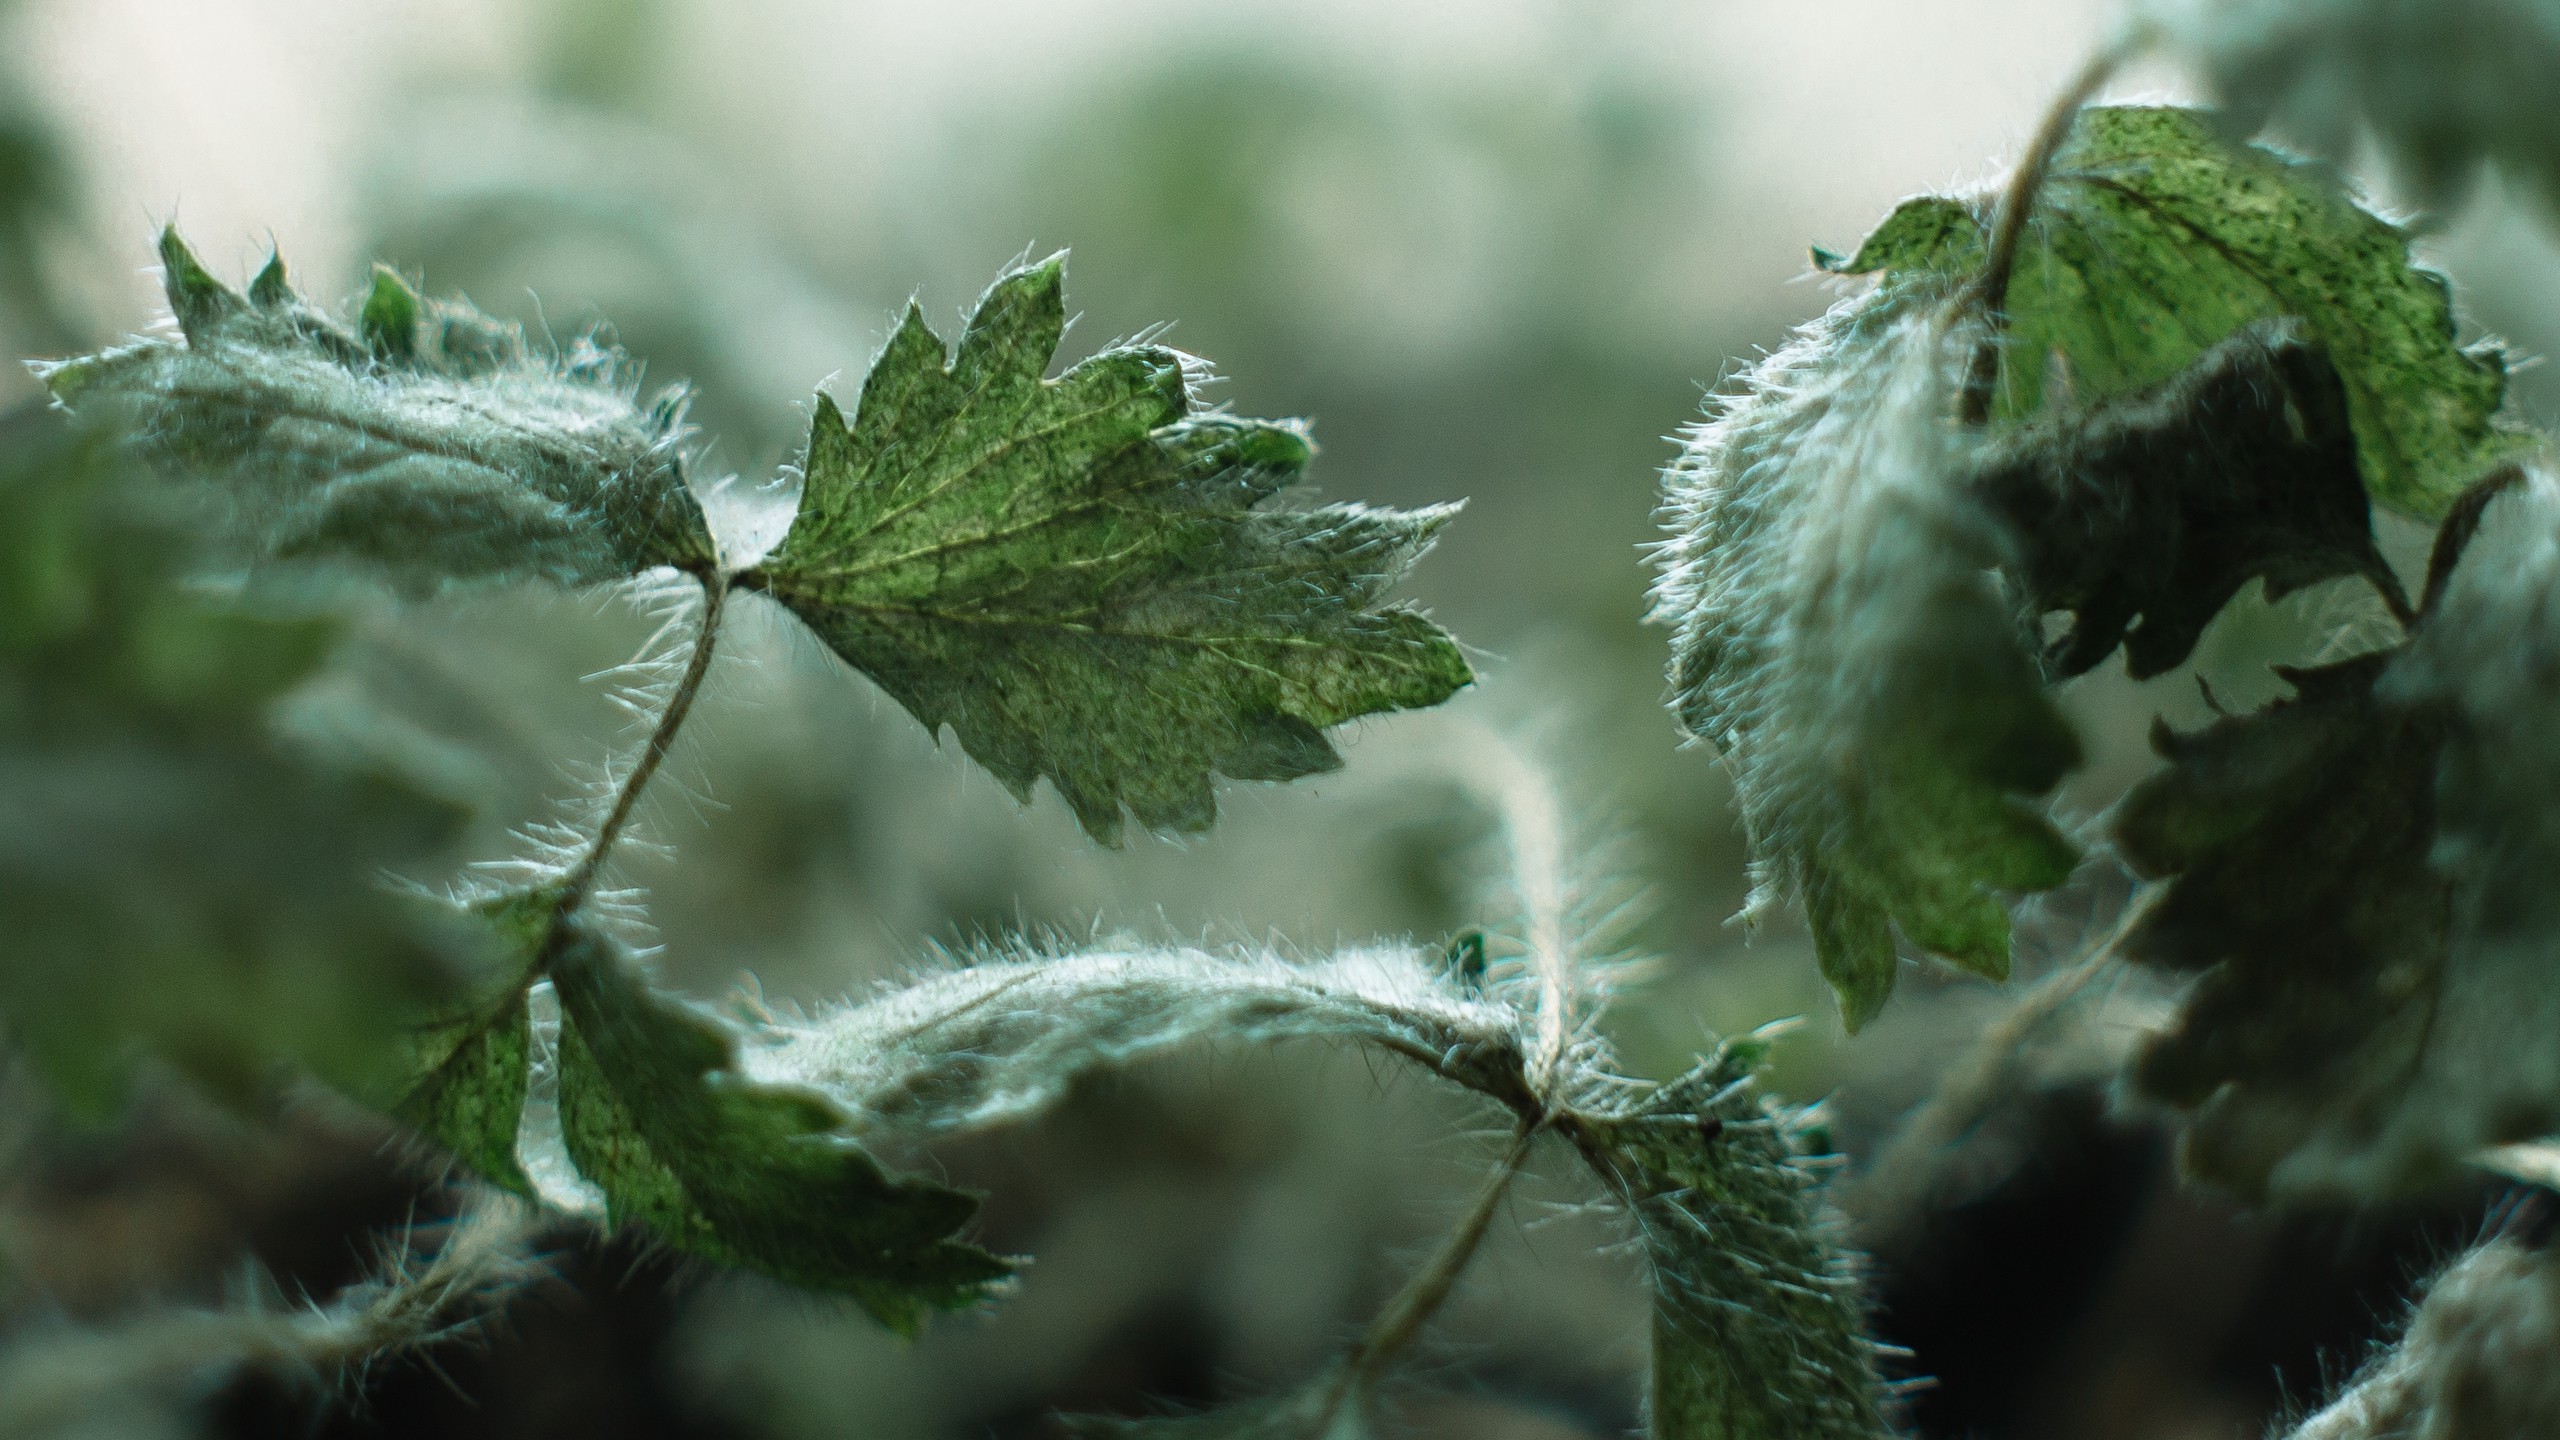 green, Frost, Plants, Nature, Leaves, Macro, Depth Of Field, Nettles, Photography Wallpaper